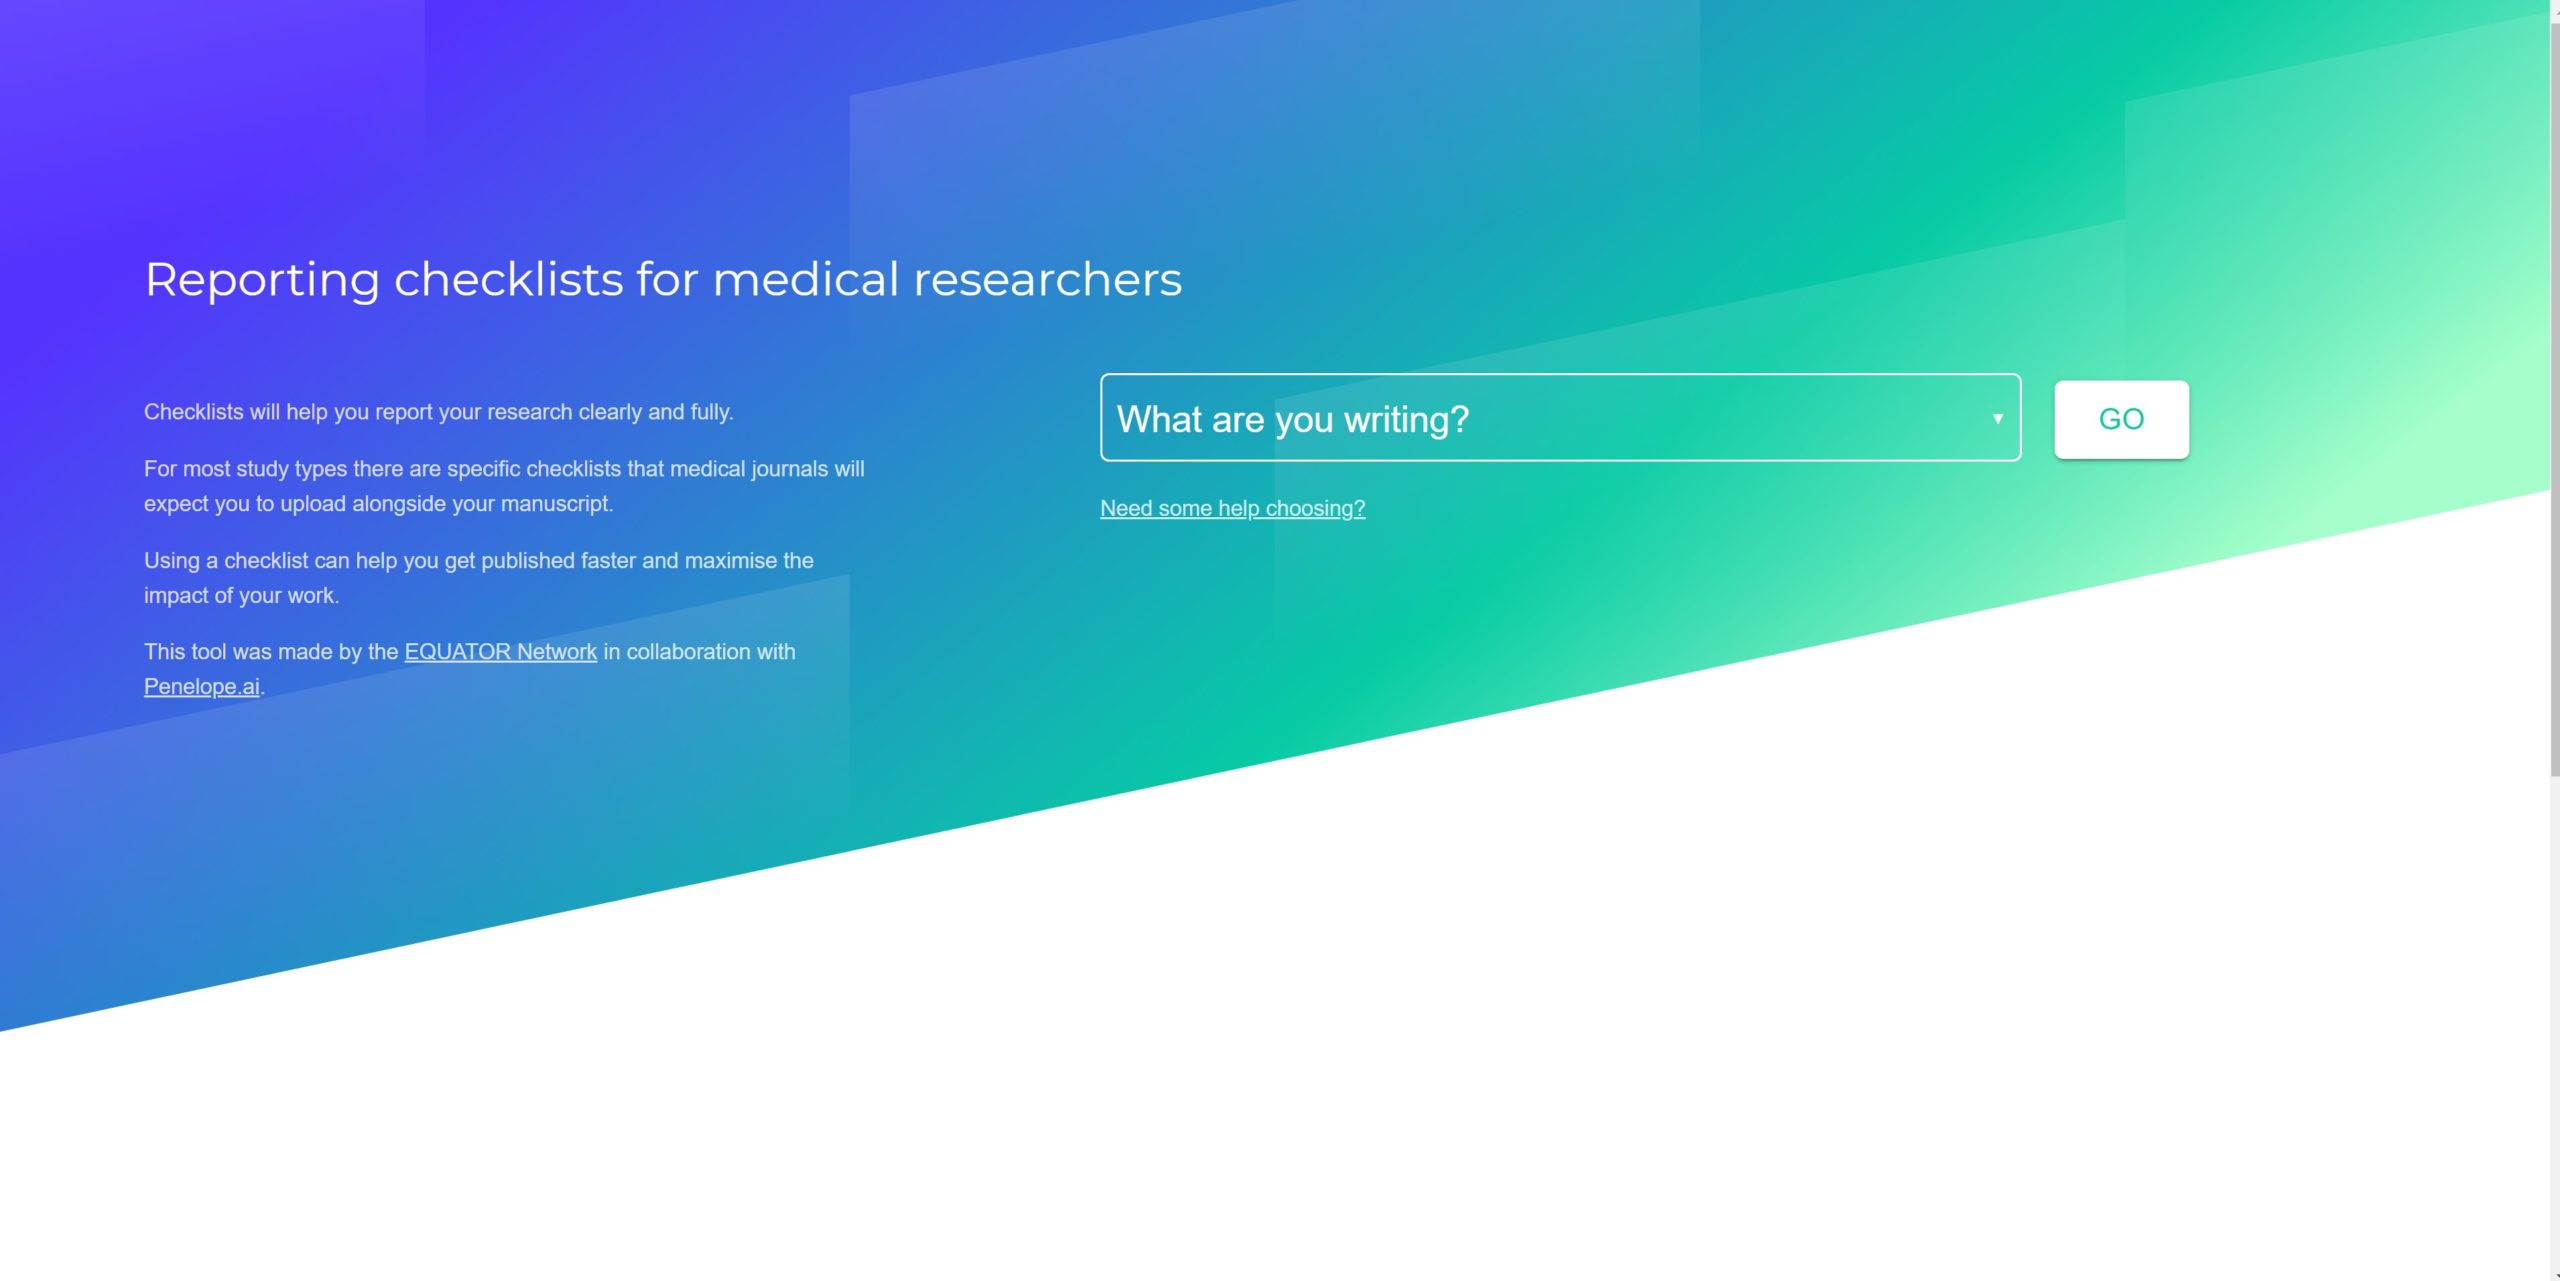 Reporting checklists for medical researchers